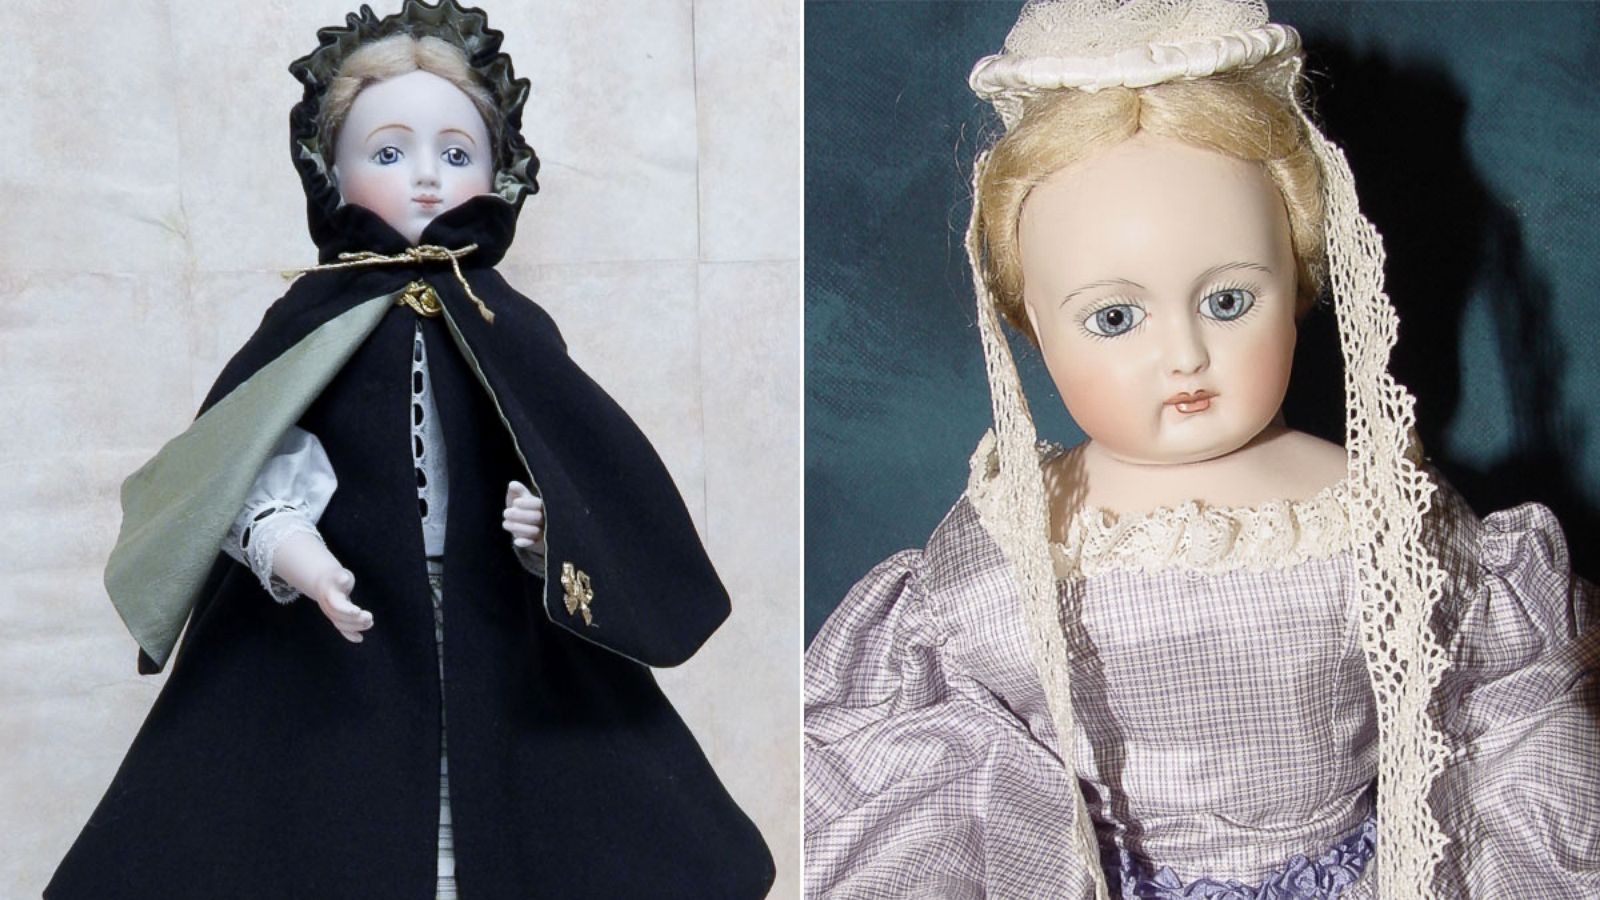 where to sell my porcelain dolls